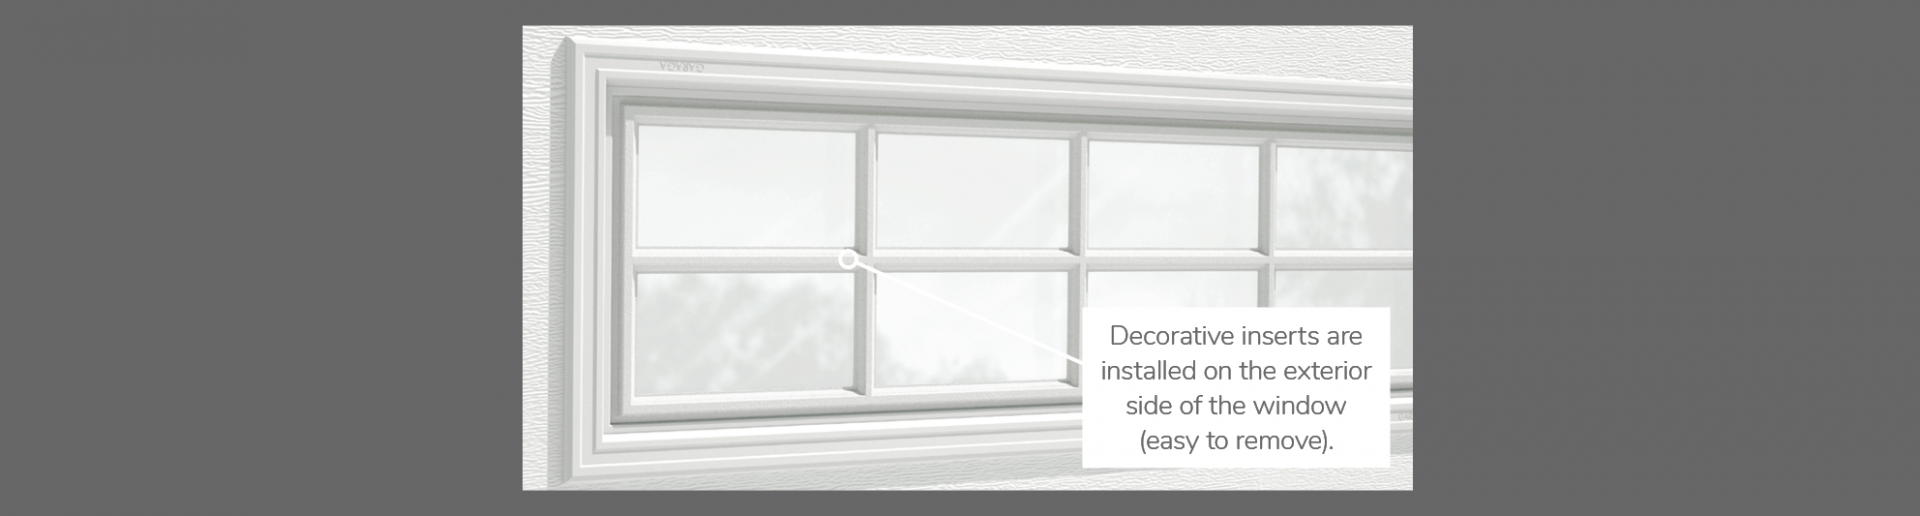 Stockton Decorative Insert, 40" x 13" or 21" x 13", available for door R-16 and R-12